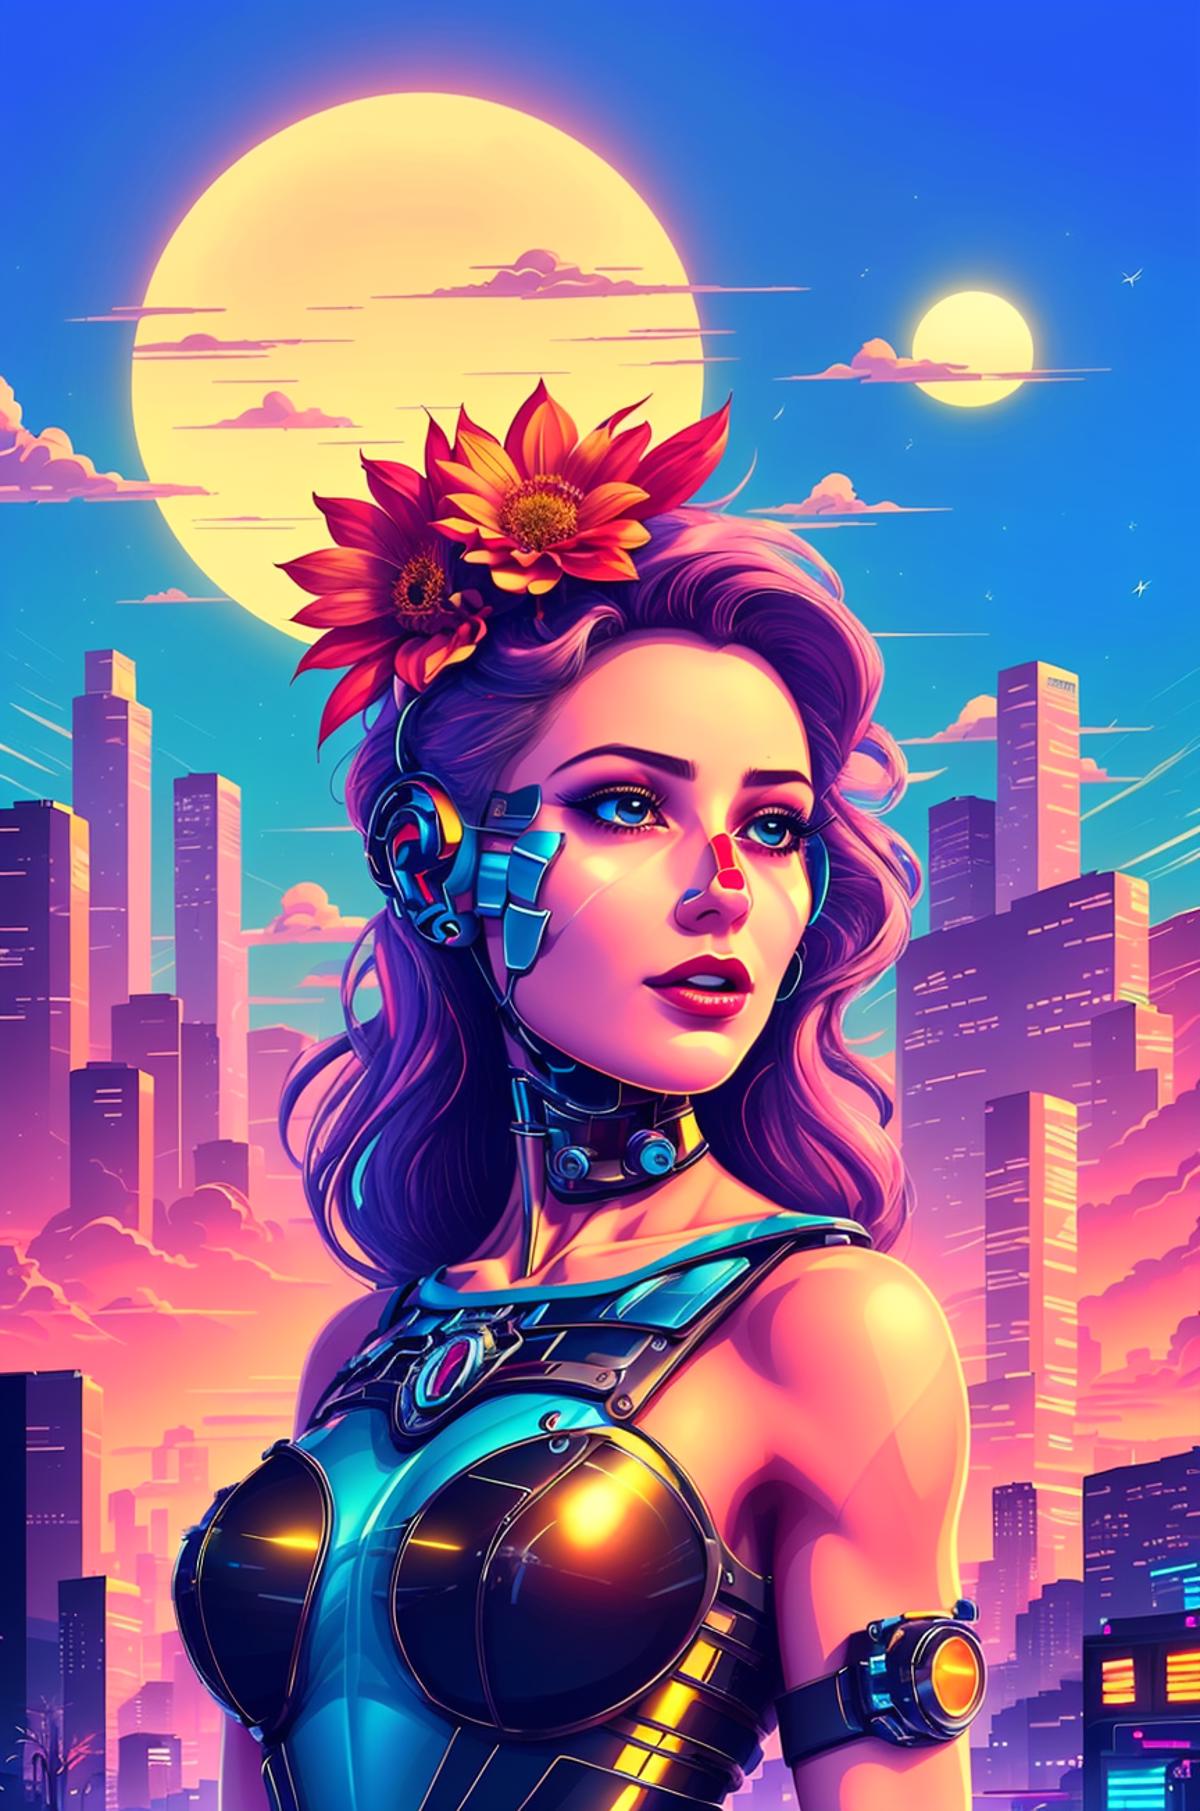 Synthwave 1983 - Style - by YeiyeiArt image by 517262521lx812